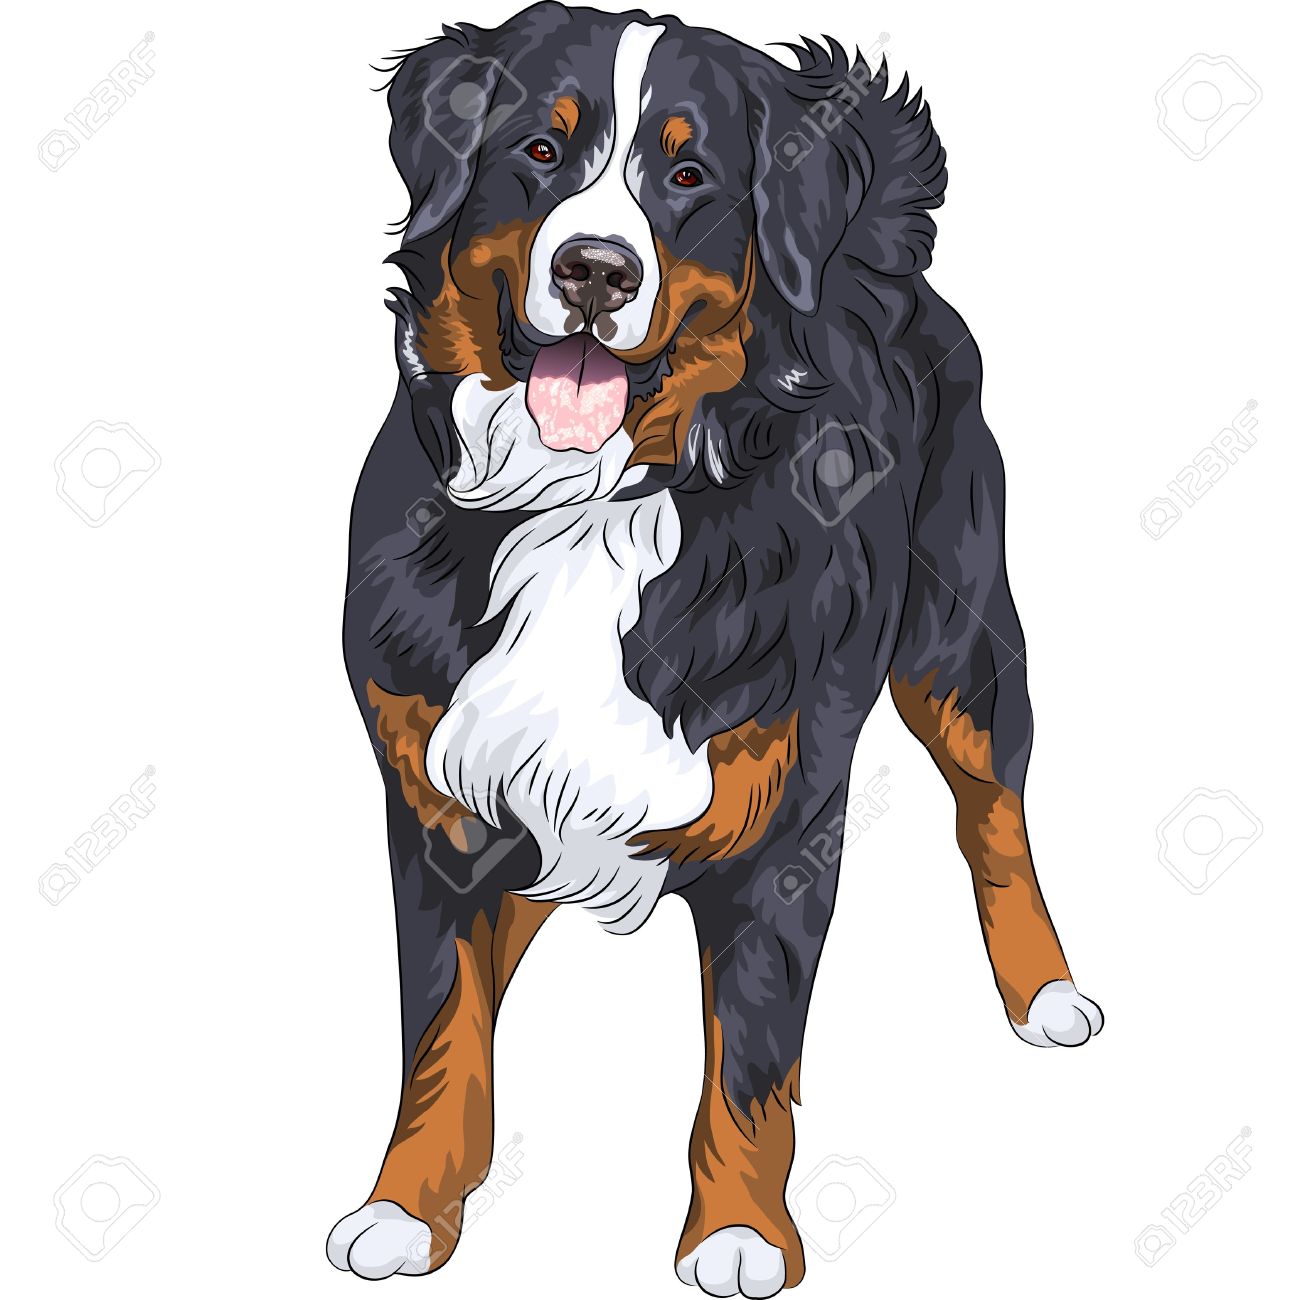 Bernese Mountain Dog clipart #10, Download drawings